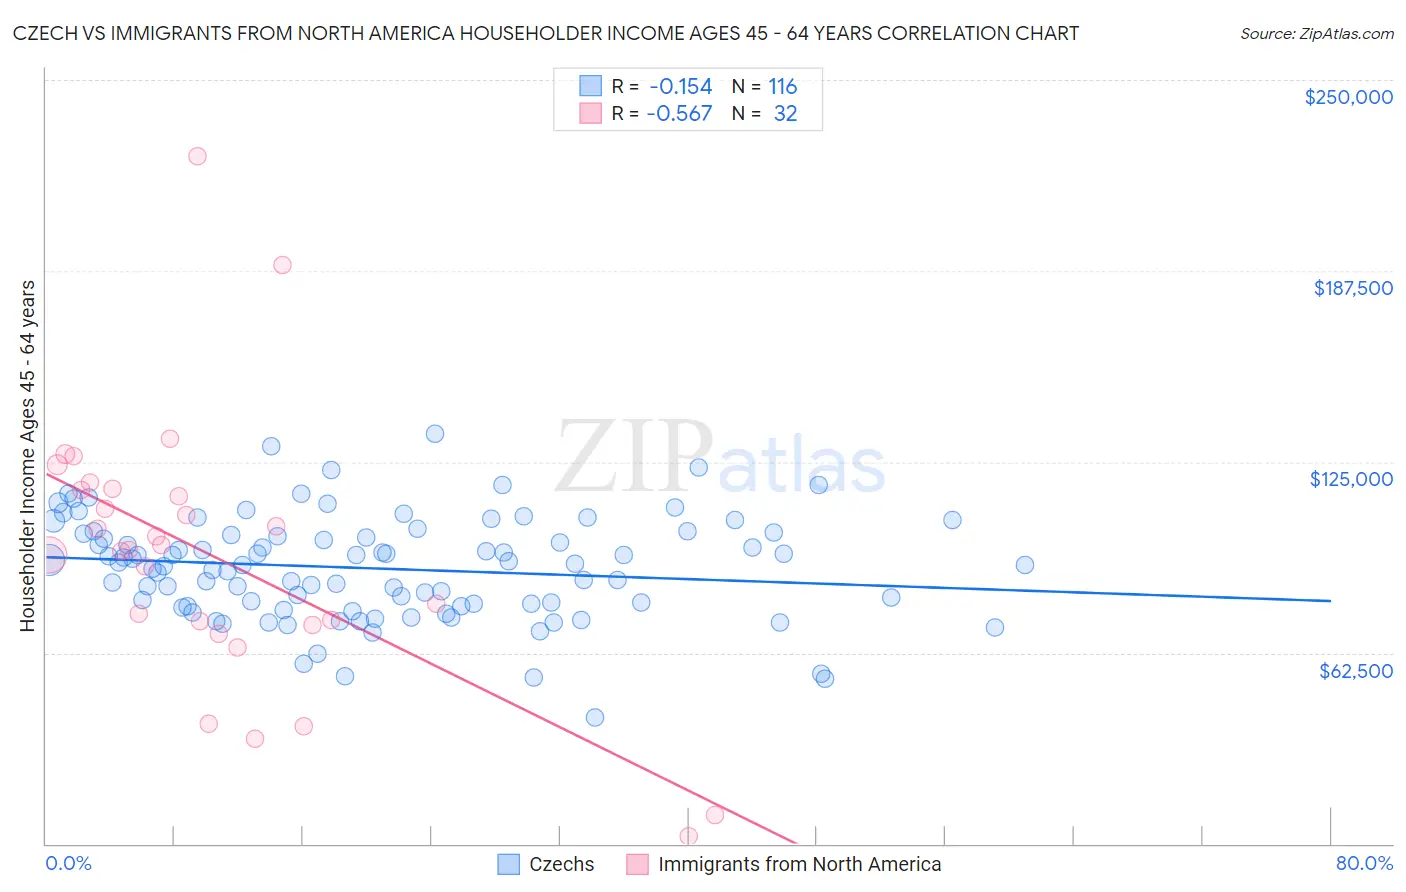 Czech vs Immigrants from North America Householder Income Ages 45 - 64 years